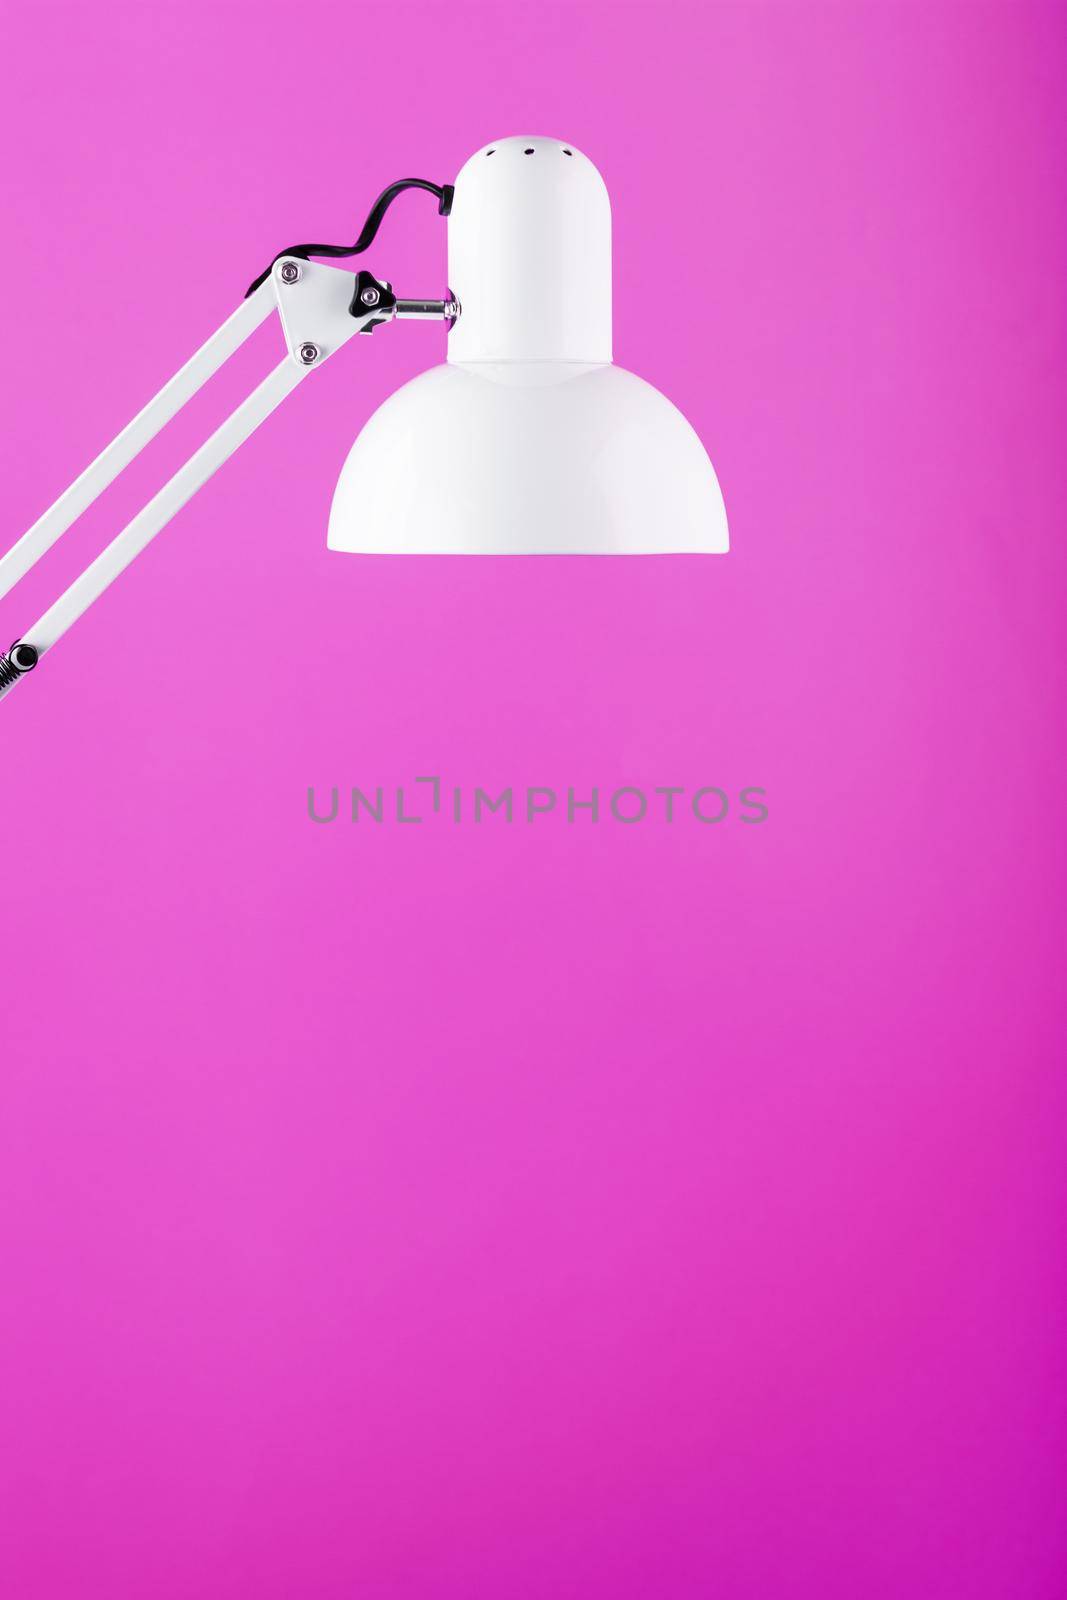 Classic table lamp on pink background with space for text and idea concept by AlexGrec